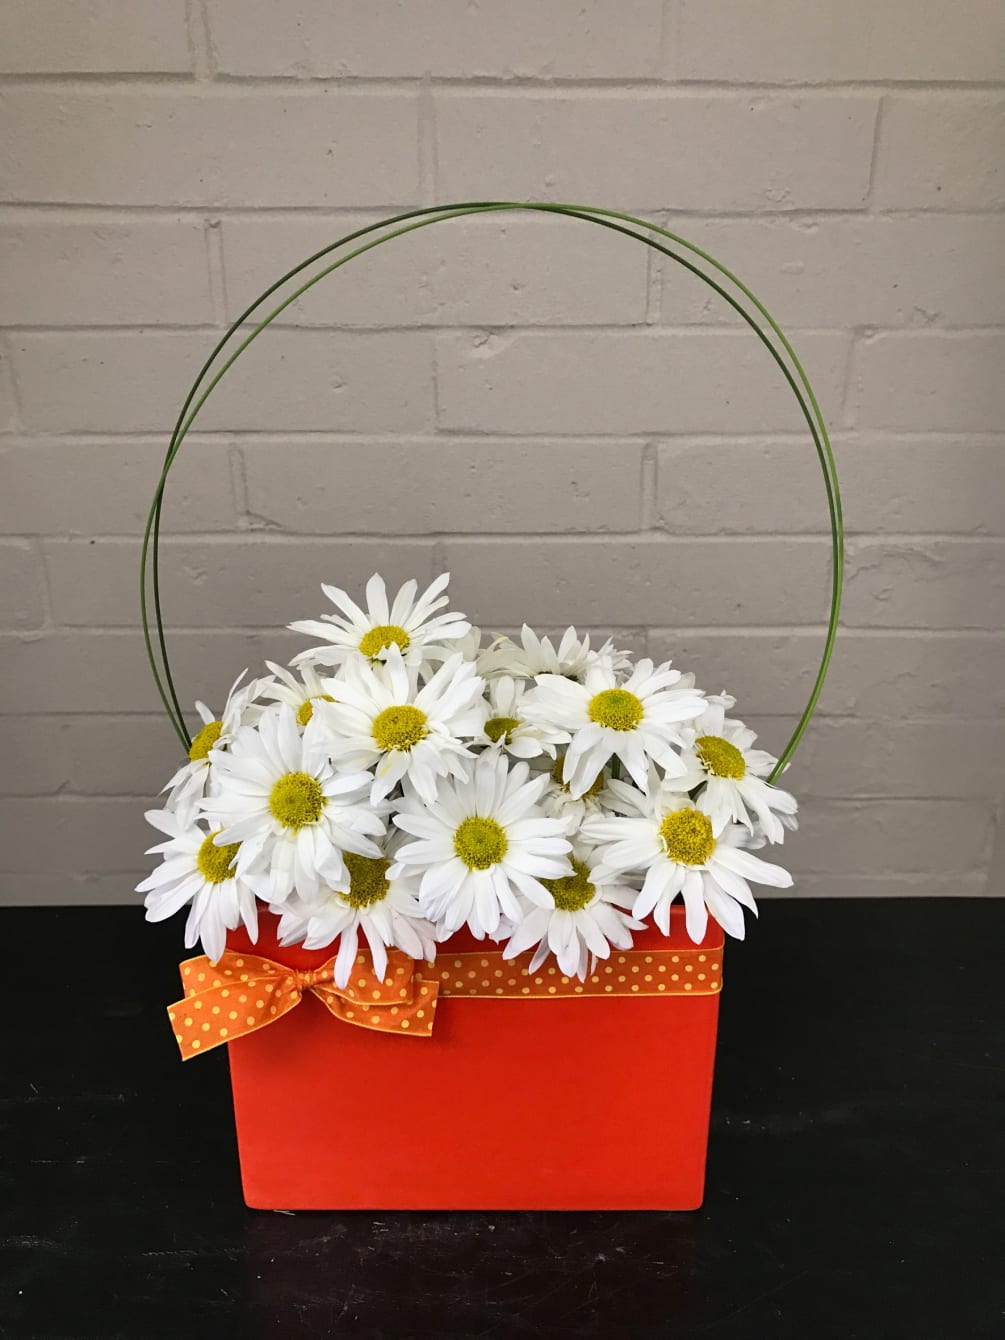 Cheerful and Fun Daisy arrangement in colorful ceramic vase.